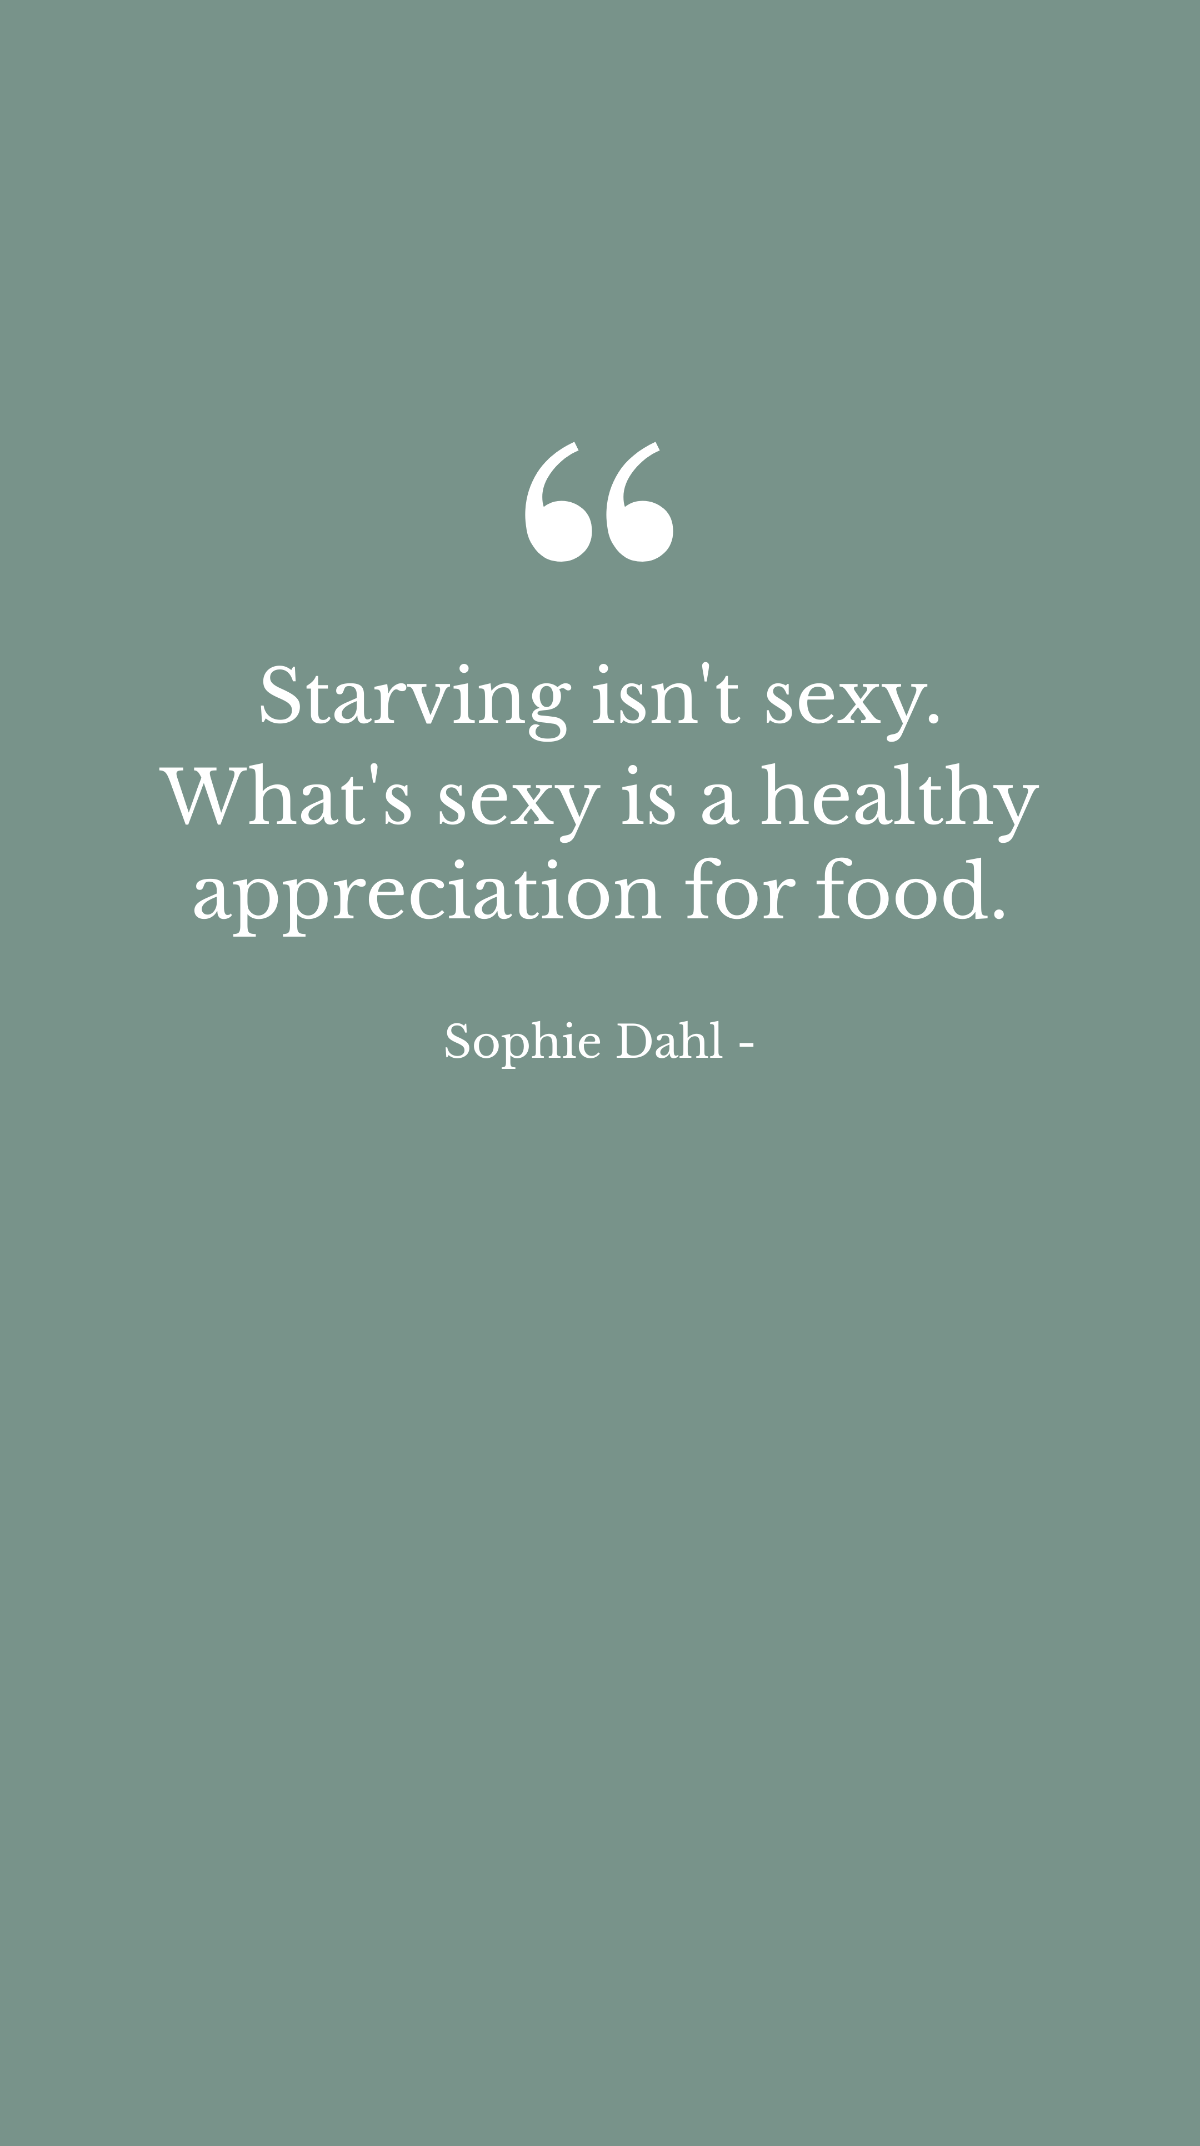 Sophie Dahl - Starving isn't sexy. What's sexy is a healthy appreciation for food.